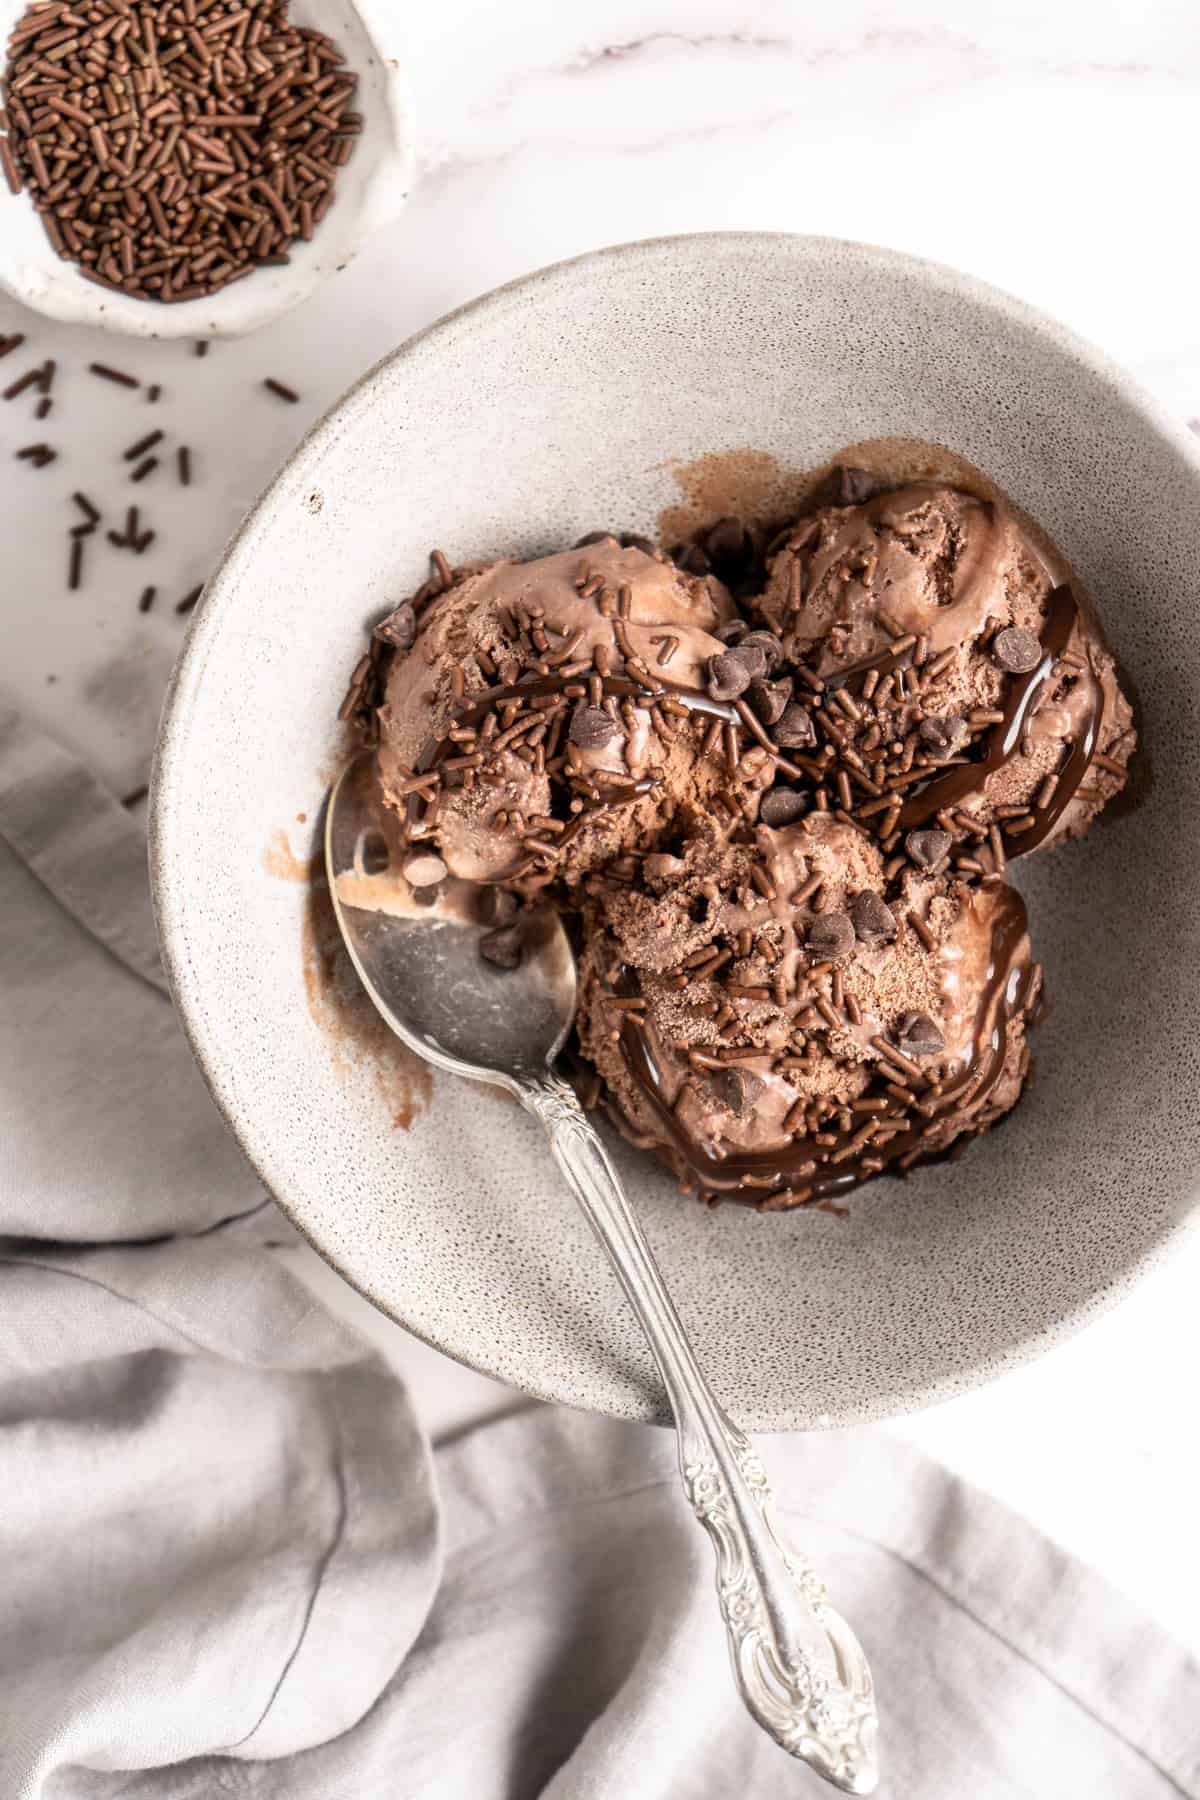 Chocolate Avocado Ice Cream in bowl with spoon and sprinkles